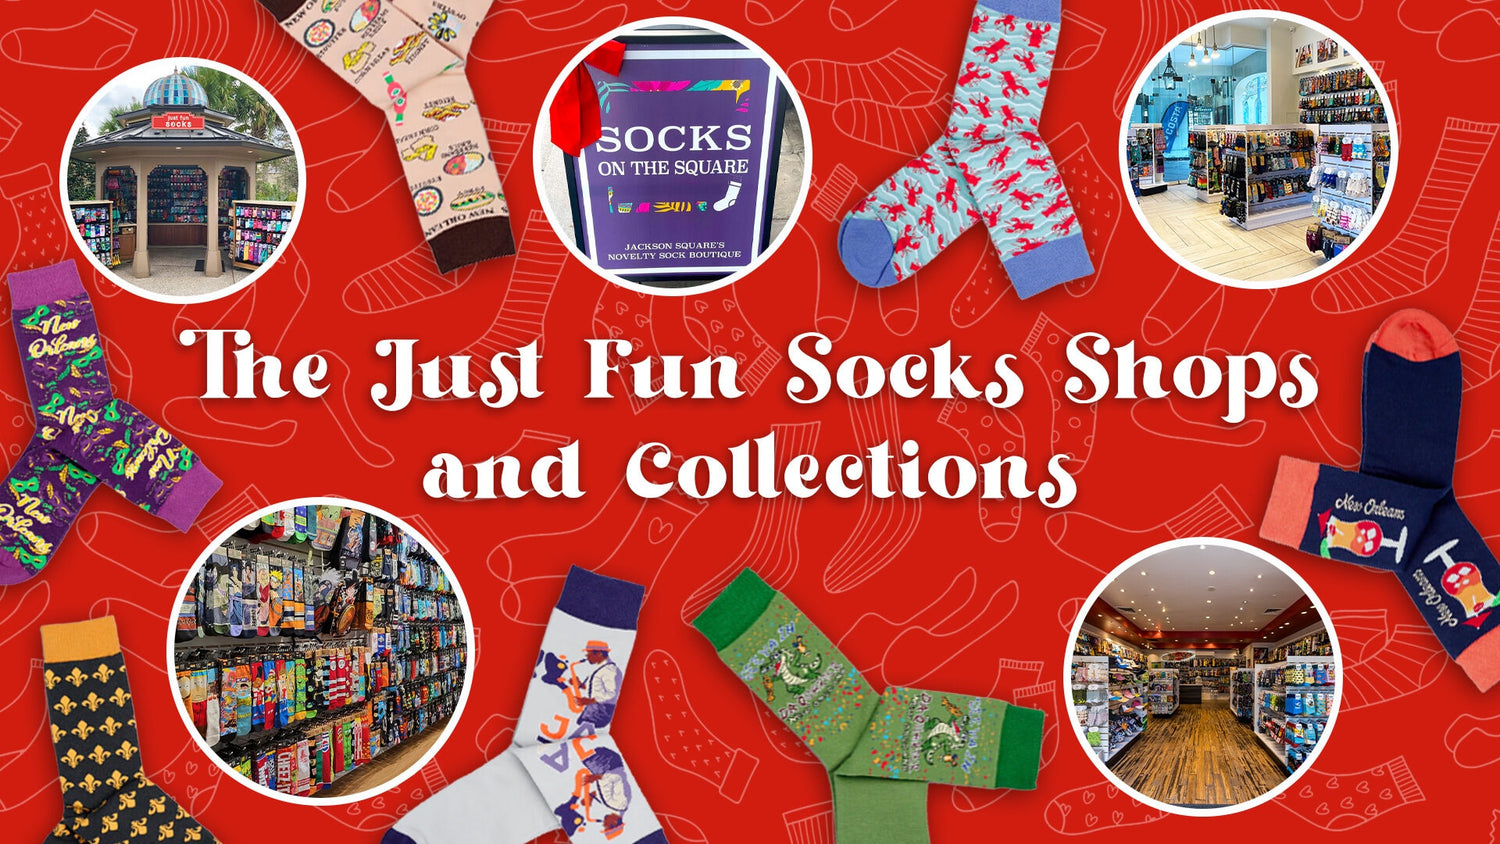 The Just Fun Socks Shops and Collections